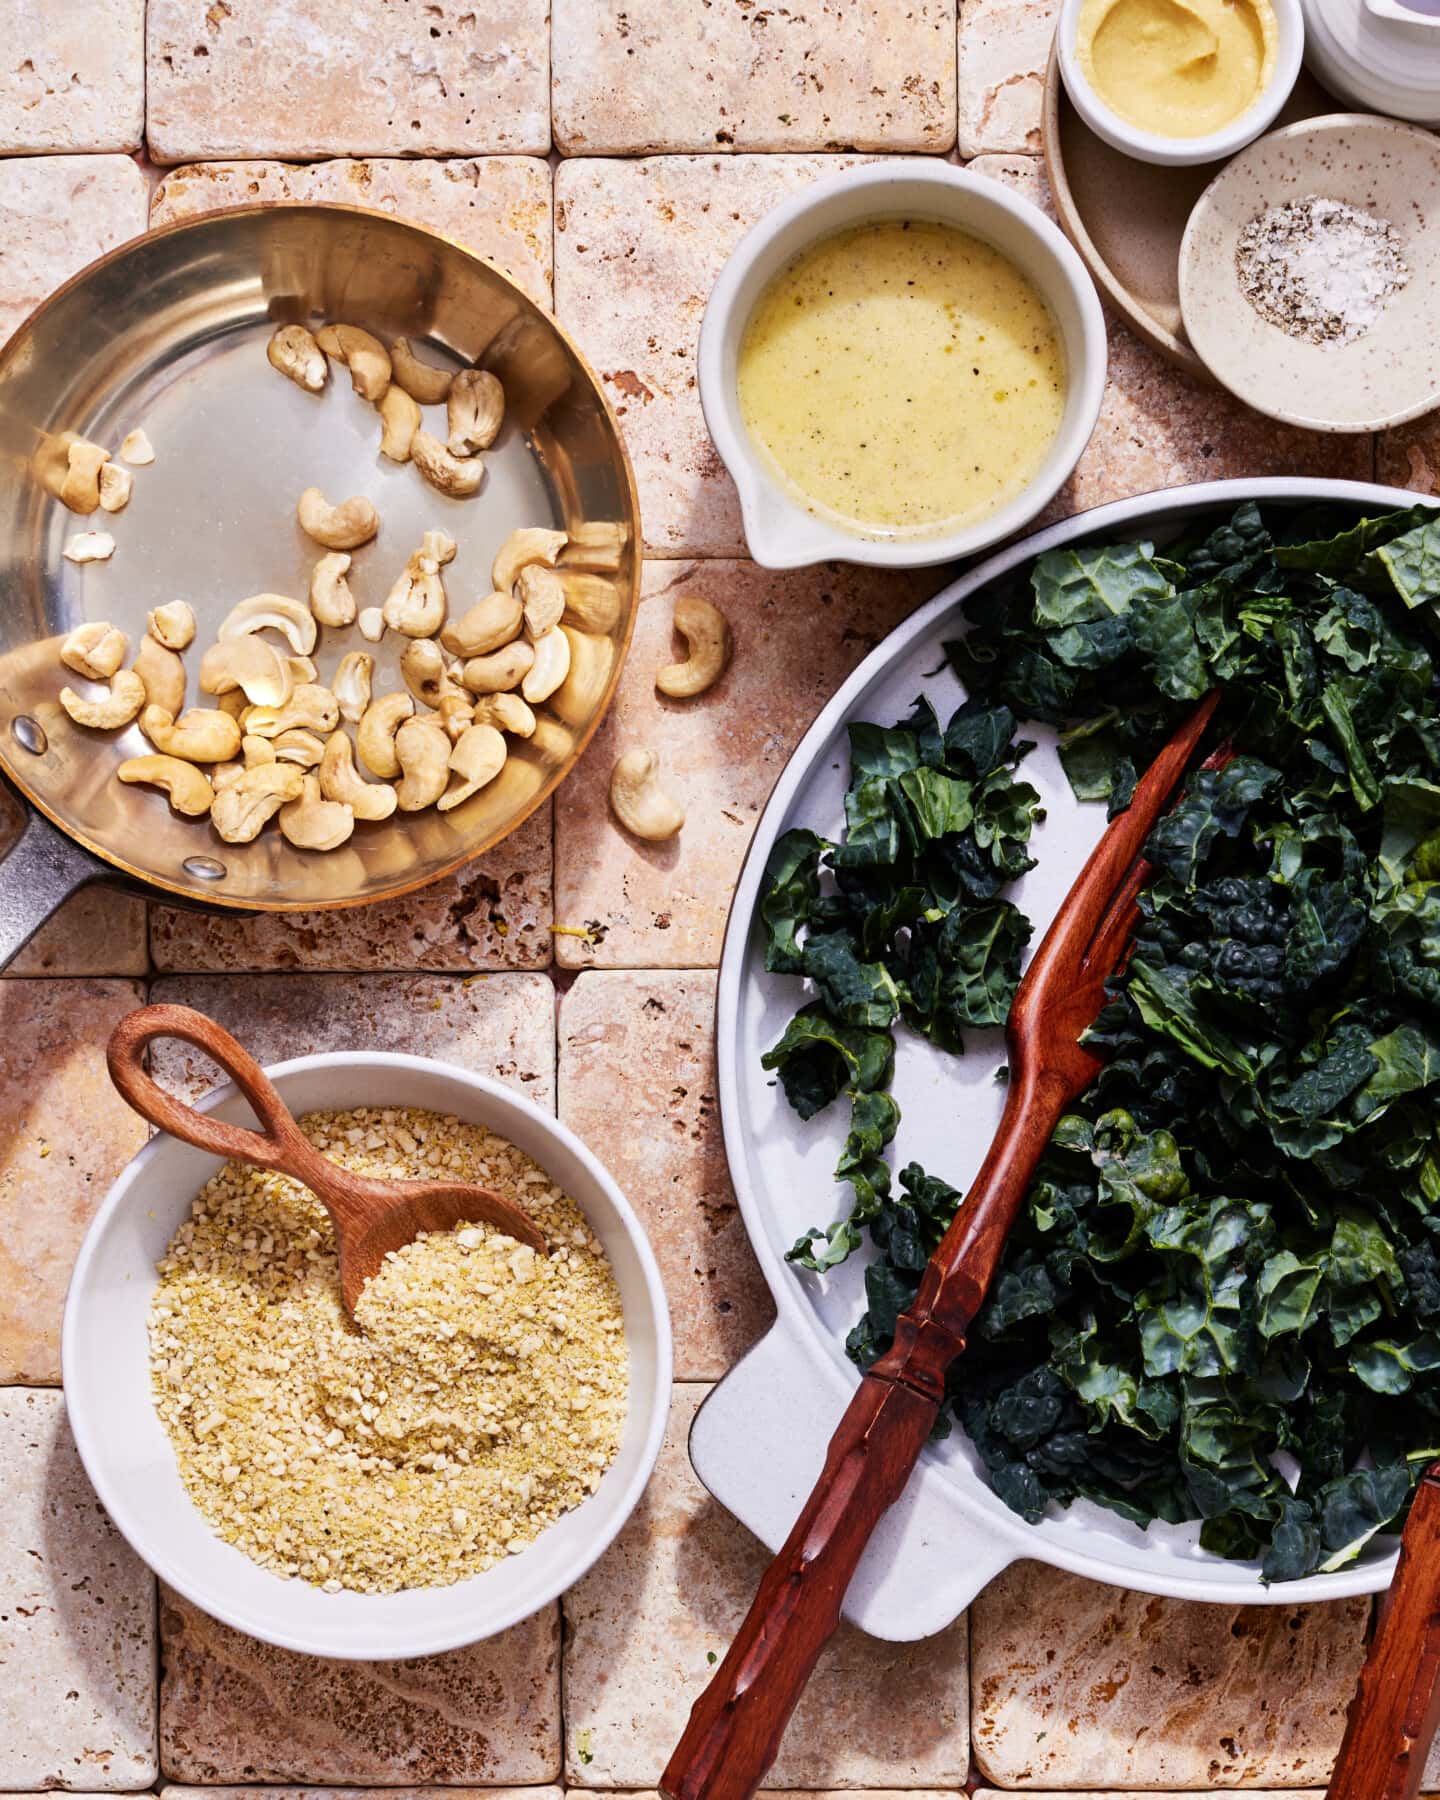 Kale salad recipe on counter with ingredients